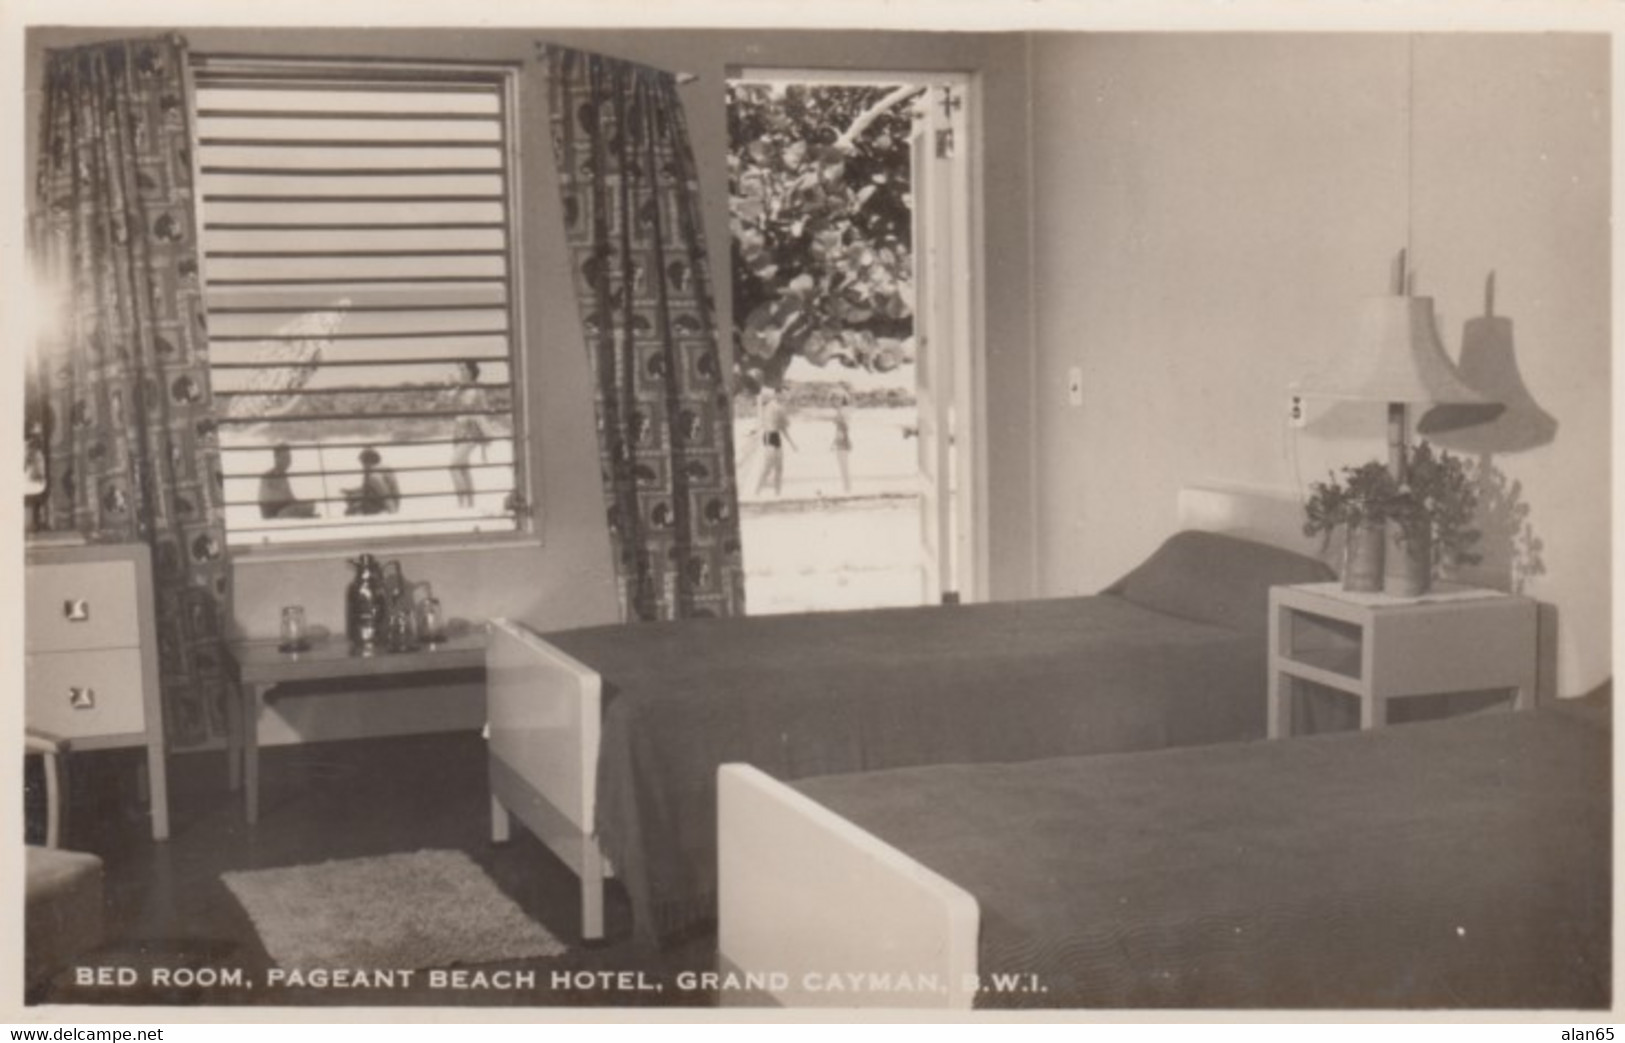 Grand Cayman BWI, Pageant Beach Hotel Bedroom Interior View, C1940s/50s Vintage Real Photo Postcard - Kaaimaneilanden